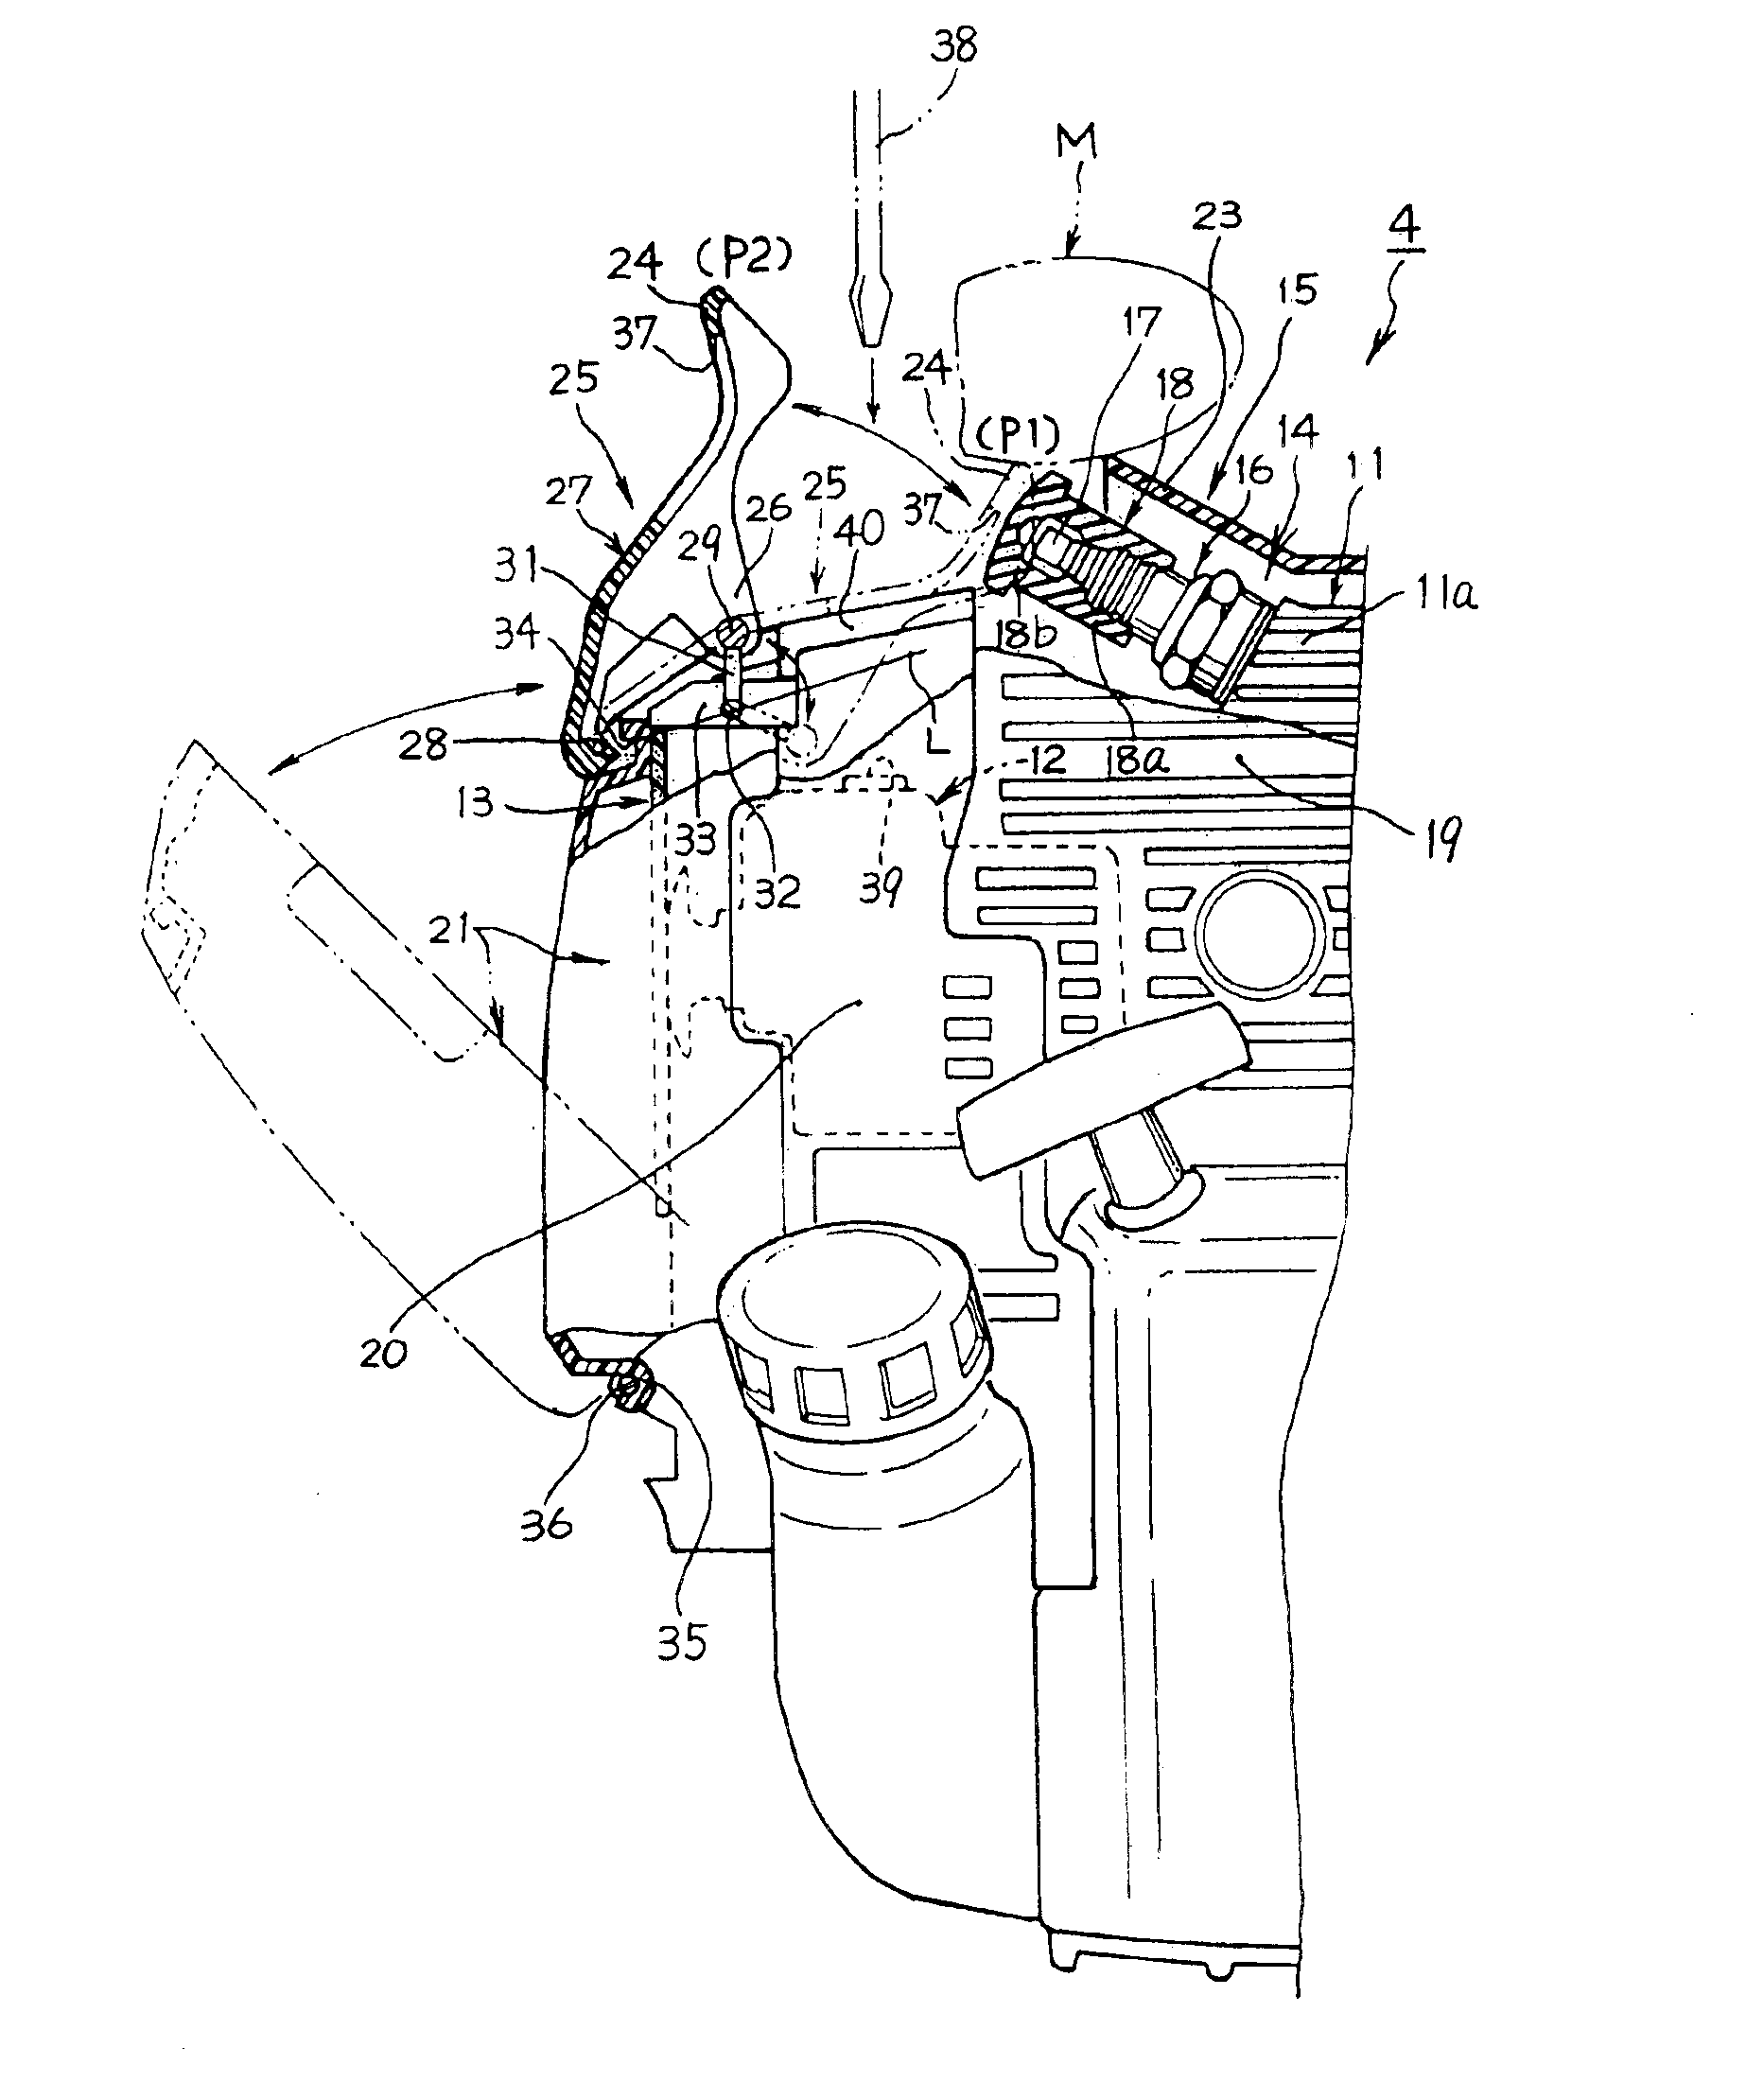 Power working machine with internal combustion engine having spark plug